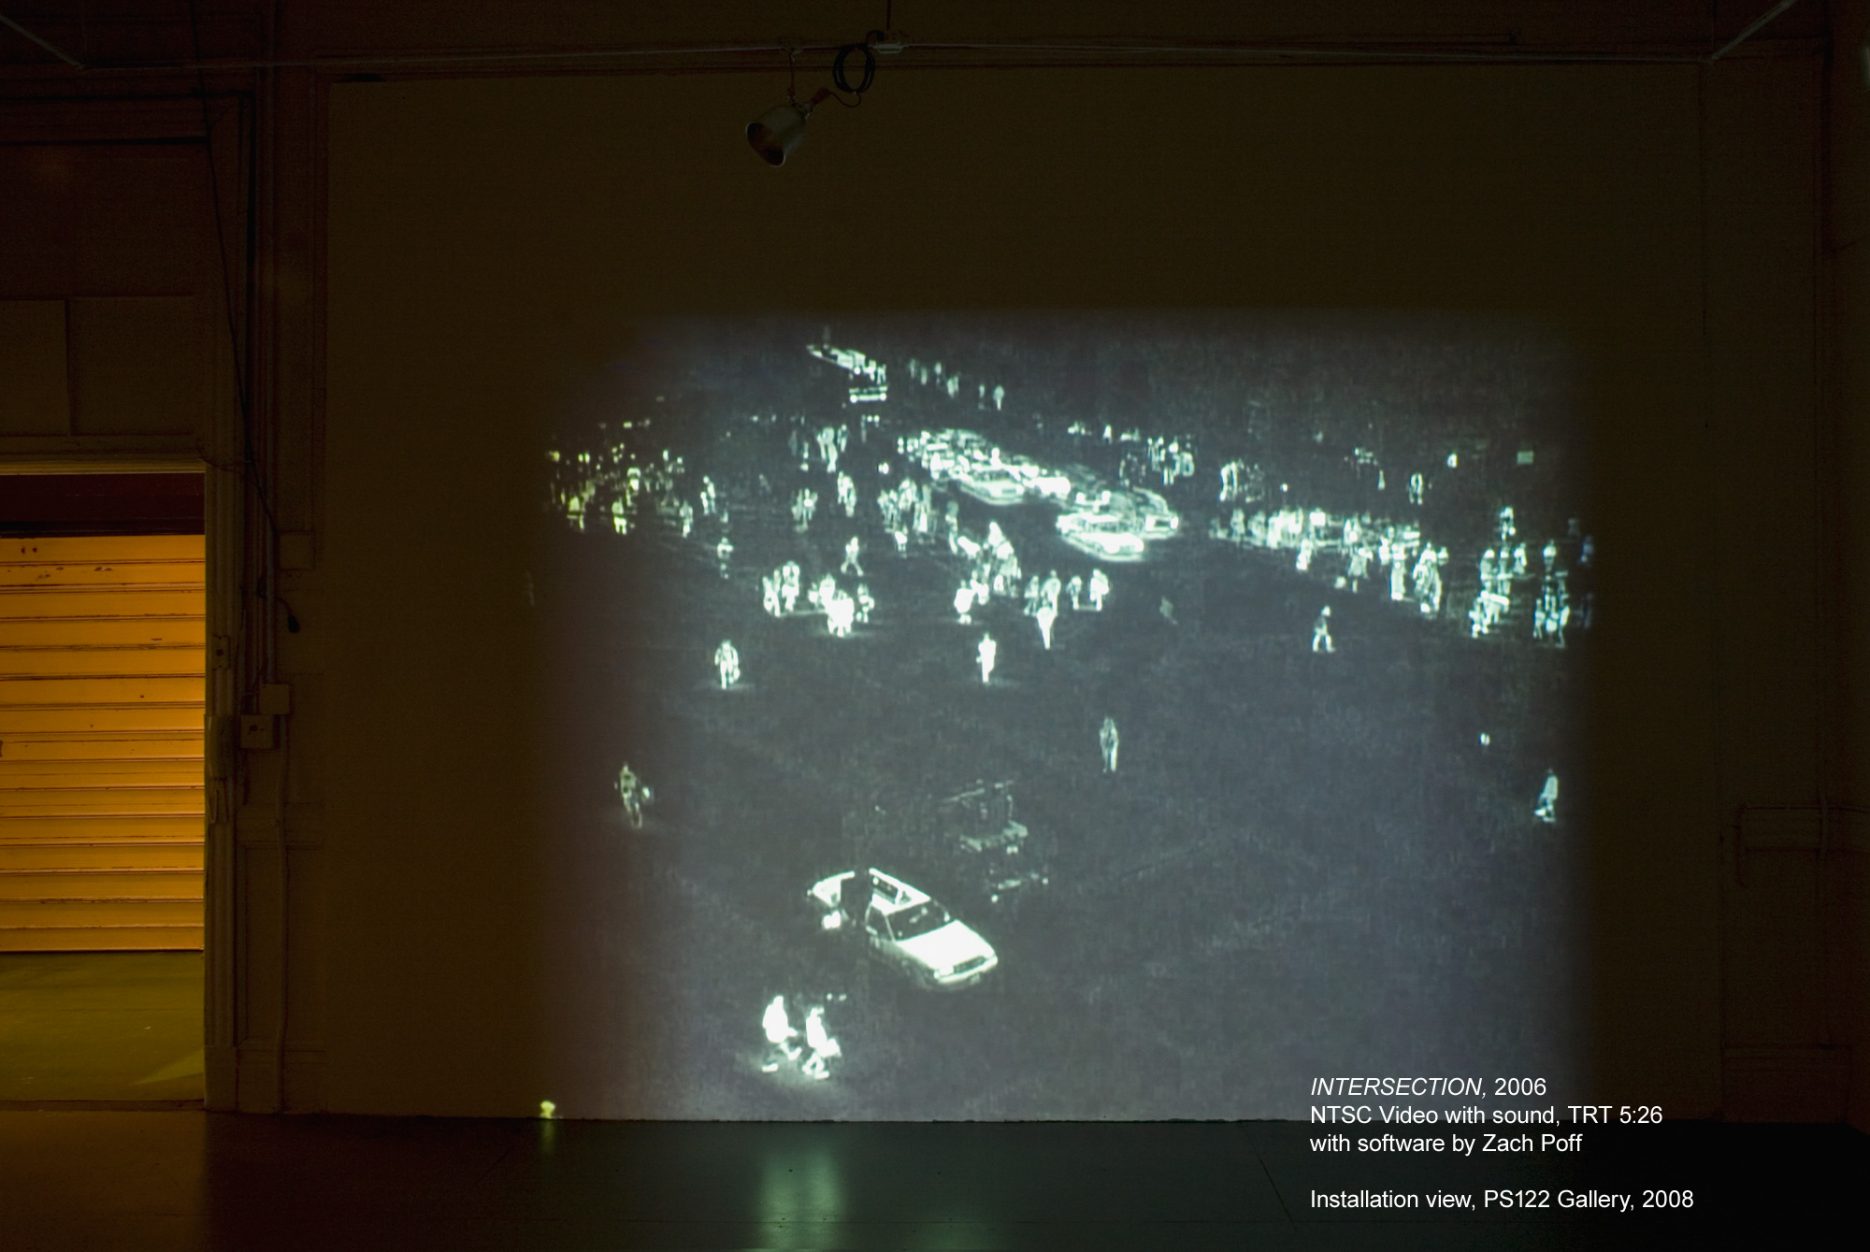 Installation view of INTERSECTION